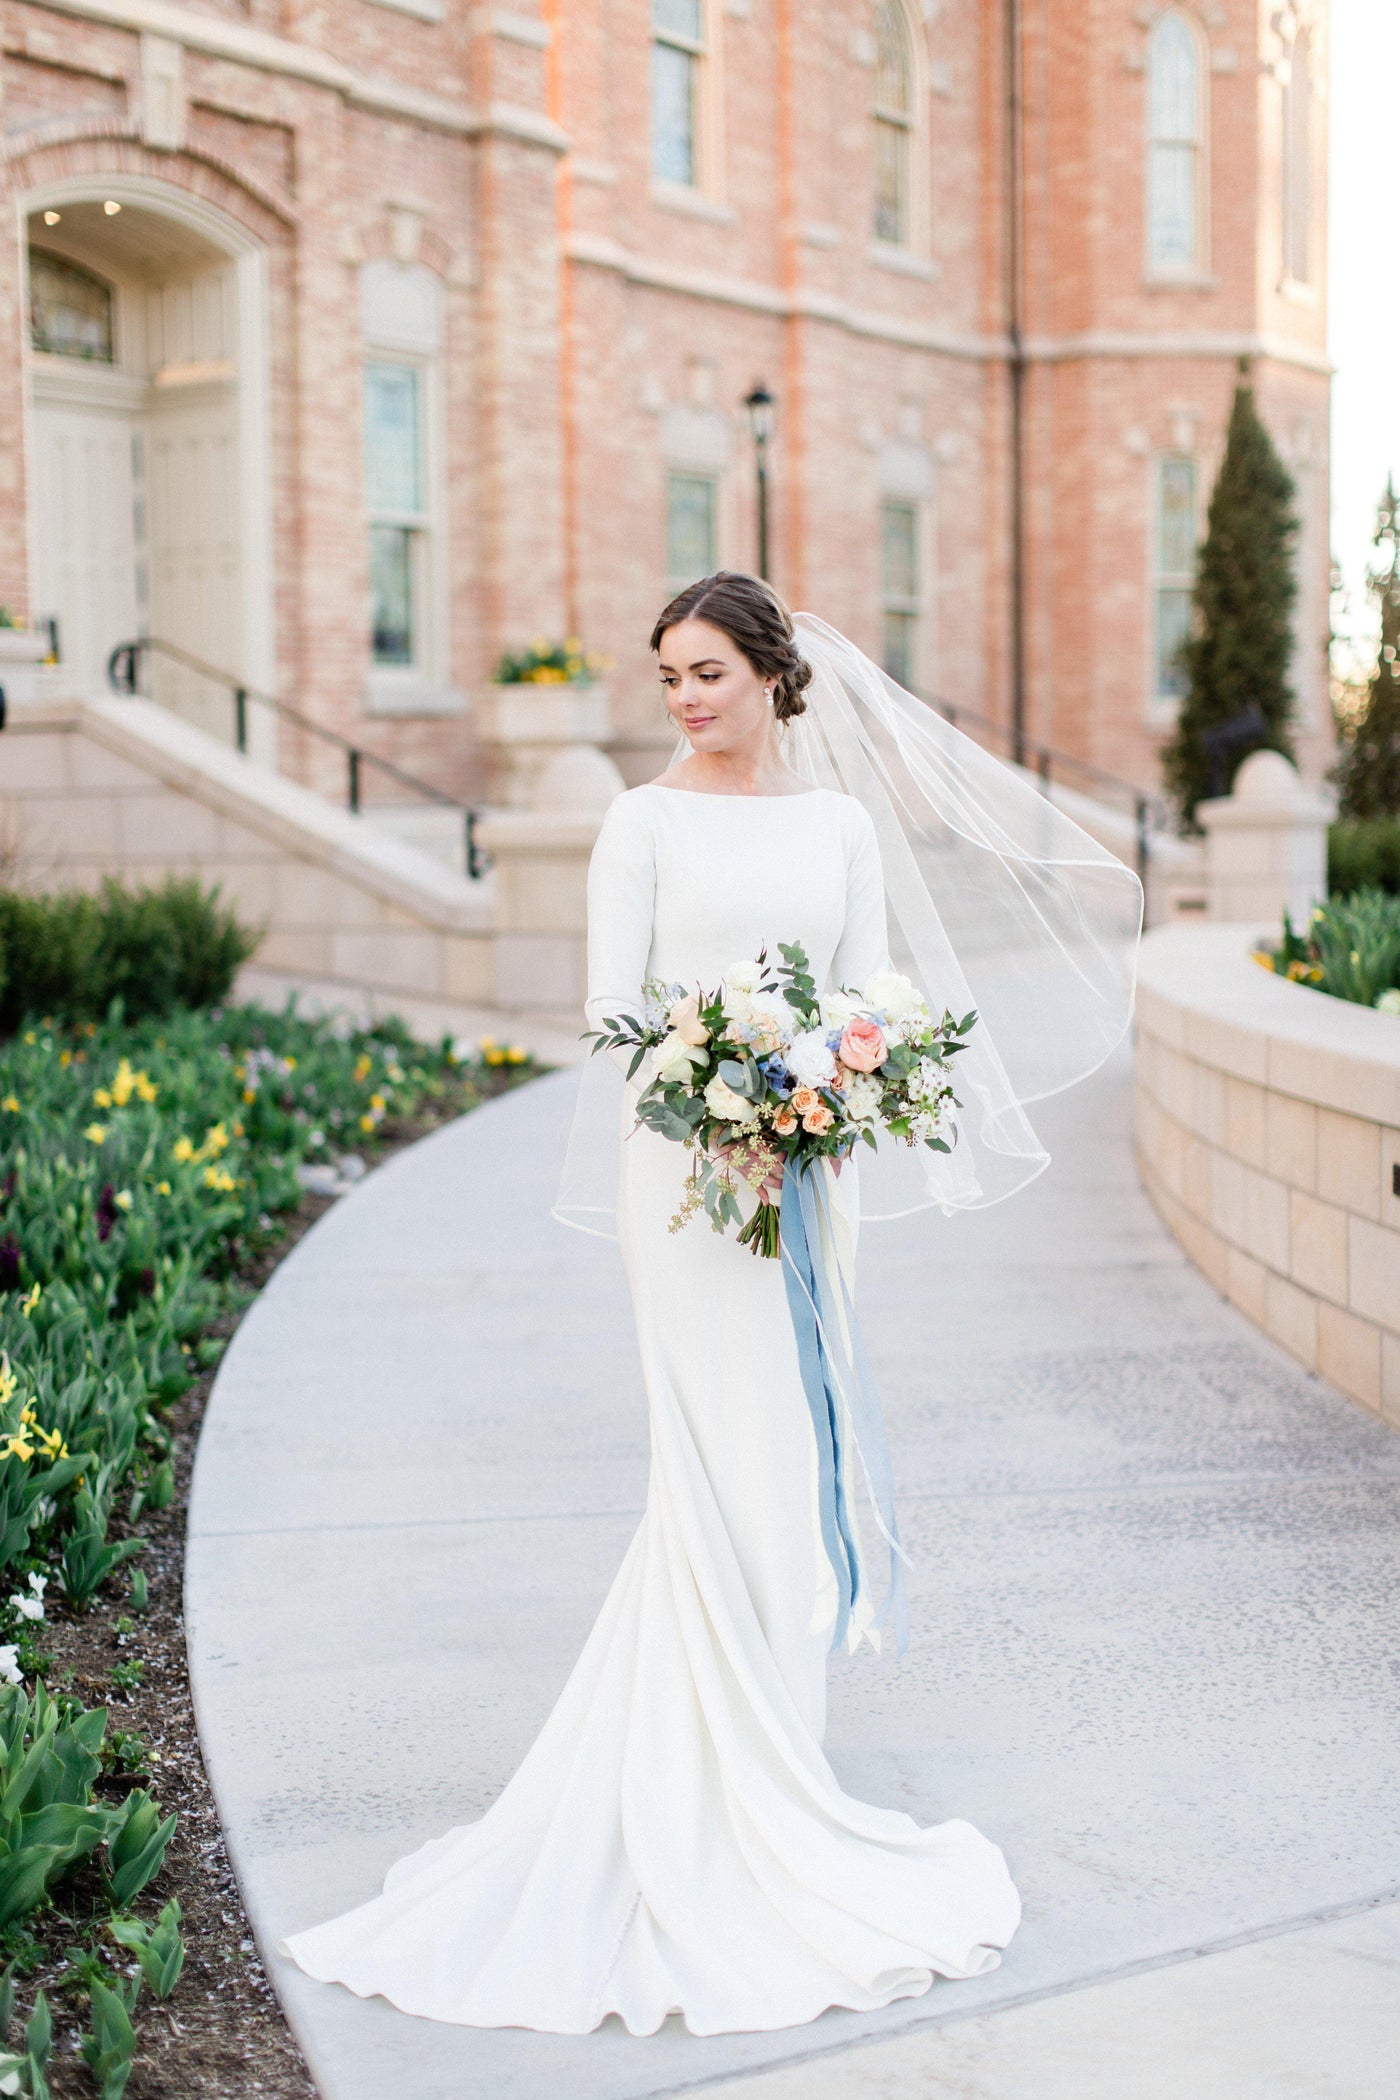 Real Bride wearing a Modest long sleeve bridal gown, style Markella, is part of the Wedding Collection of LatterDayBride, a Salt Lake City bridal shop.